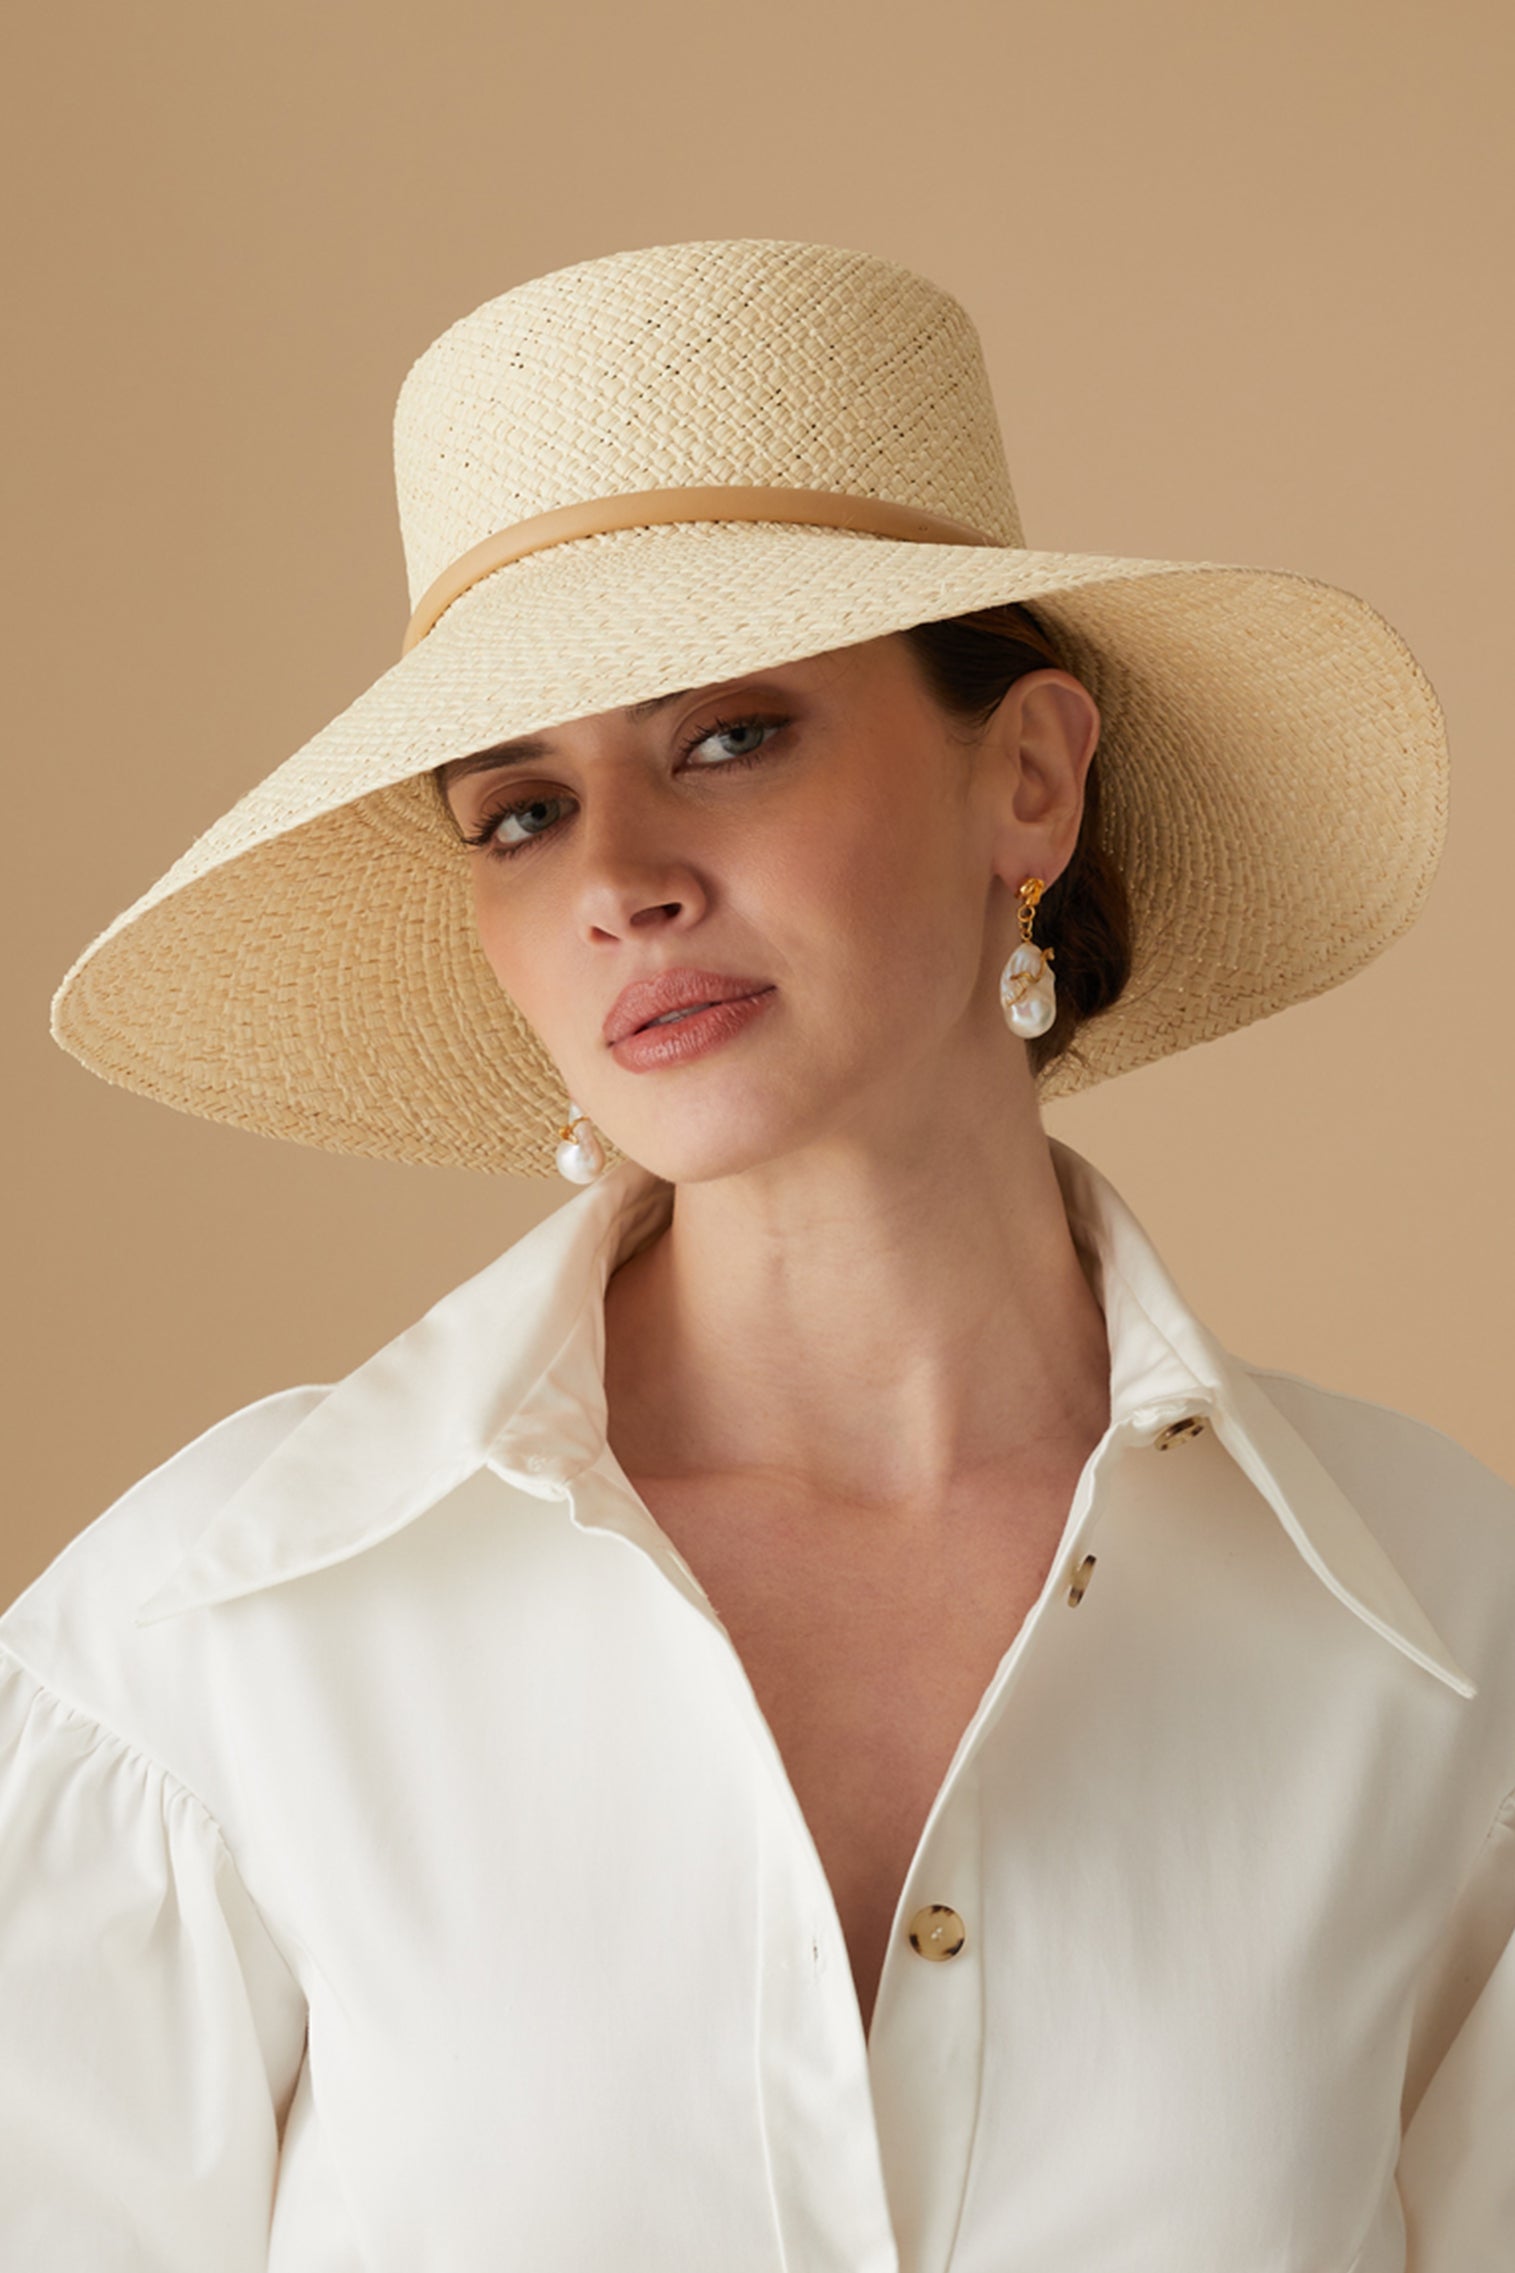 Willow Panama - Women's Fedoras, Trilbies & Cloches - Lock & Co. Hatters London UK